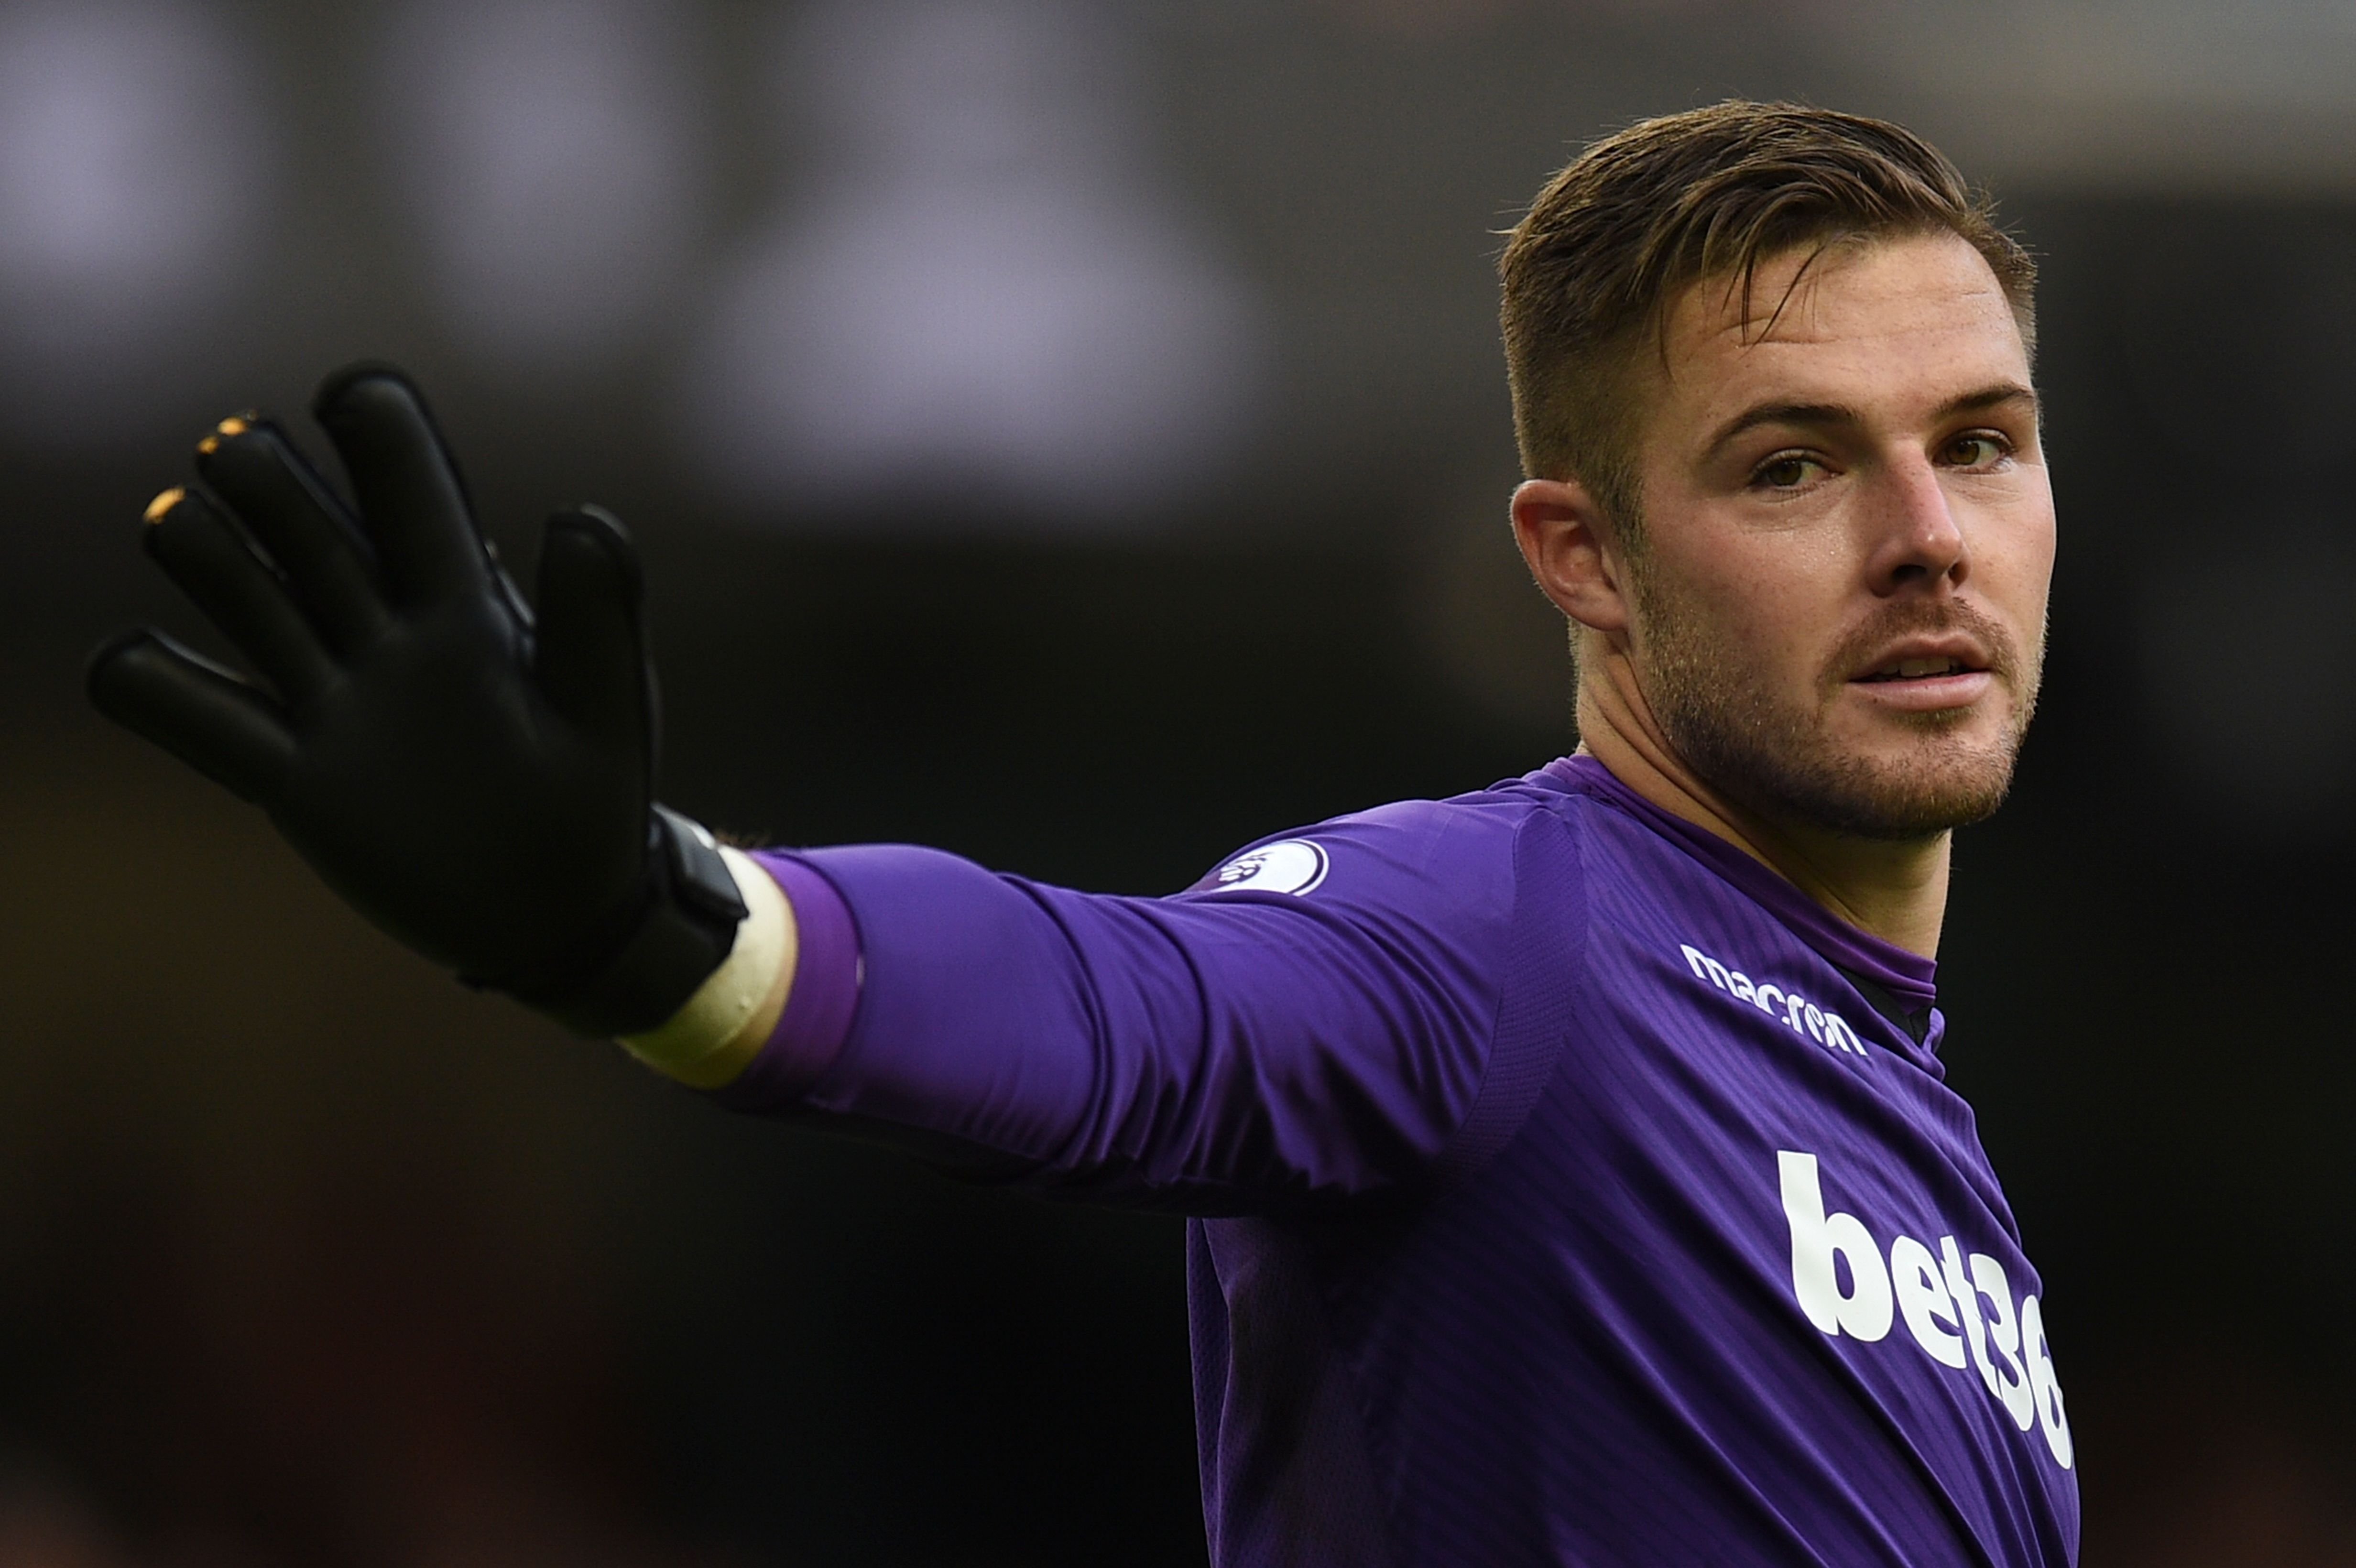 Stoke City's English goalkeeper Jack Butland is seen during the English Premier League football match between Manchester City and Stoke City at the Etihad Stadium in Manchester, north west England, on October 14, 2017. / AFP PHOTO / Oli SCARFF / RESTRICTED TO EDITORIAL USE. No use with unauthorized audio, video, data, fixture lists, club/league logos or 'live' services. Online in-match use limited to 75 images, no video emulation. No use in betting, games or single club/league/player publications. / (Photo credit should read OLI SCARFF/AFP/Getty Images)